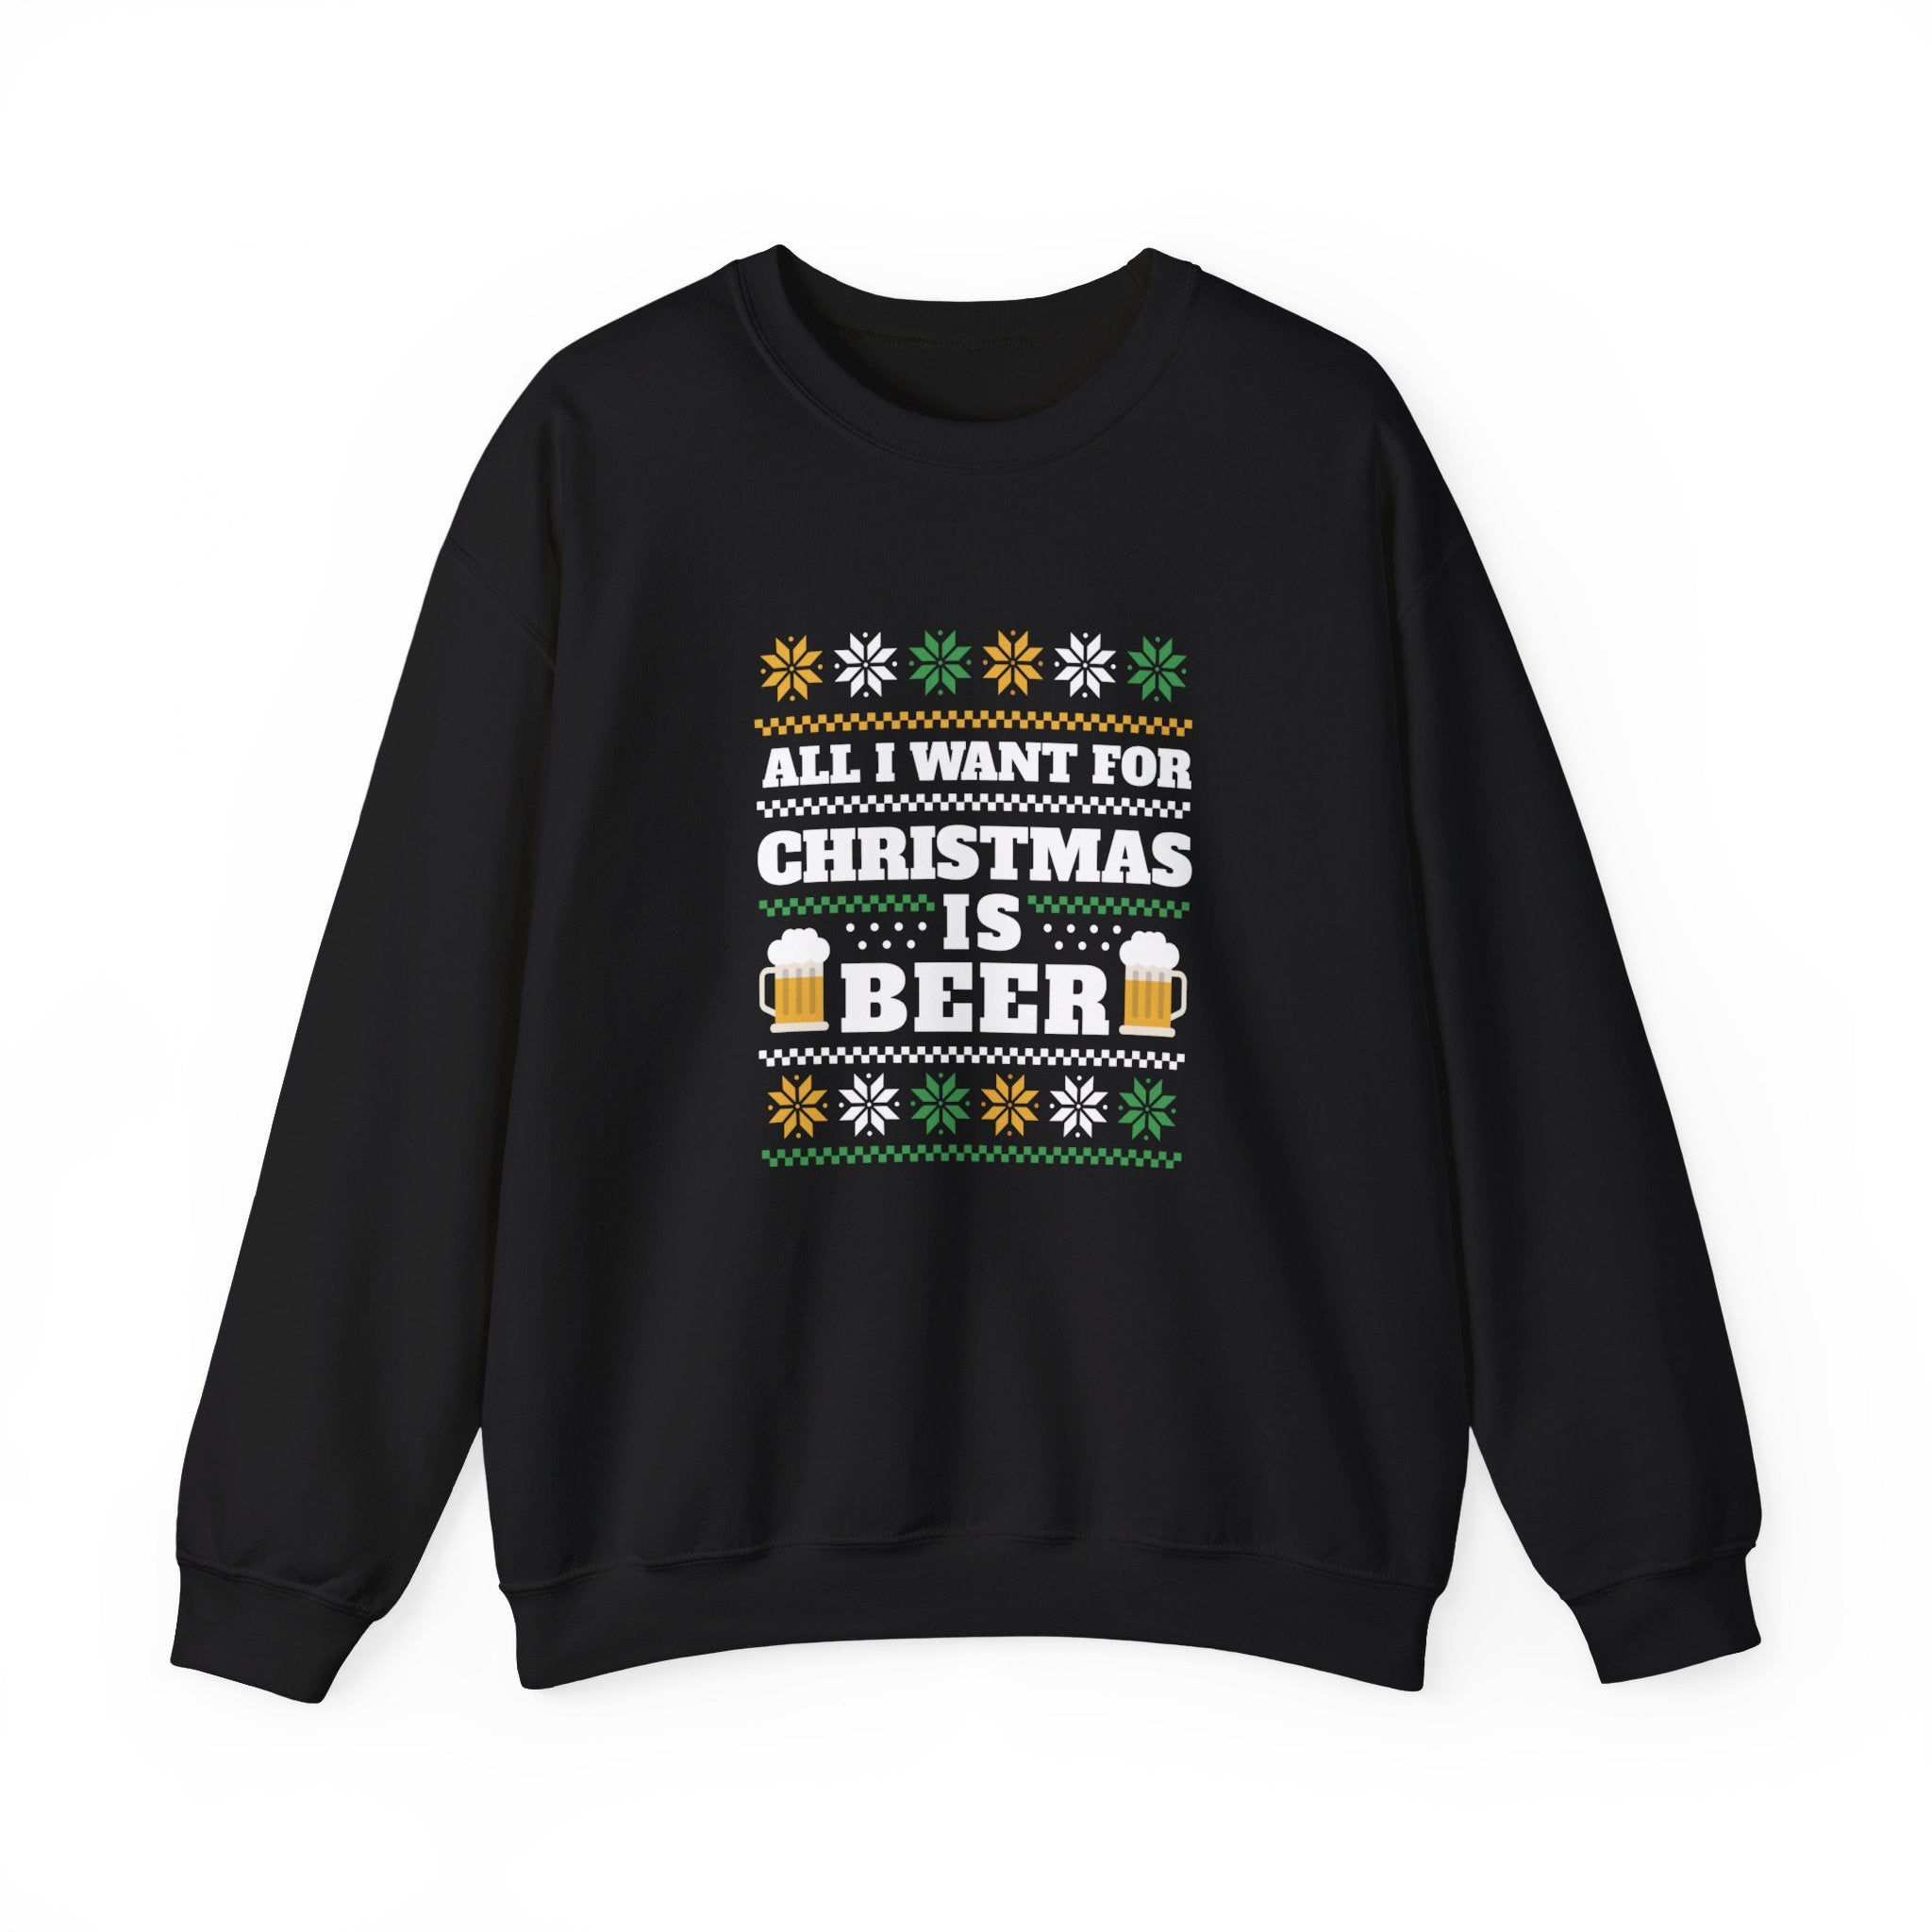 A black sweatshirt adorned with festive patterns and text that reads, "All I Want for Christmas is Beer," featuring illustrations of beer mugs, perfect for the colder months. This **Beer Ugly Sweater - Sweatshirt** will keep you cozy and in the holiday spirit!